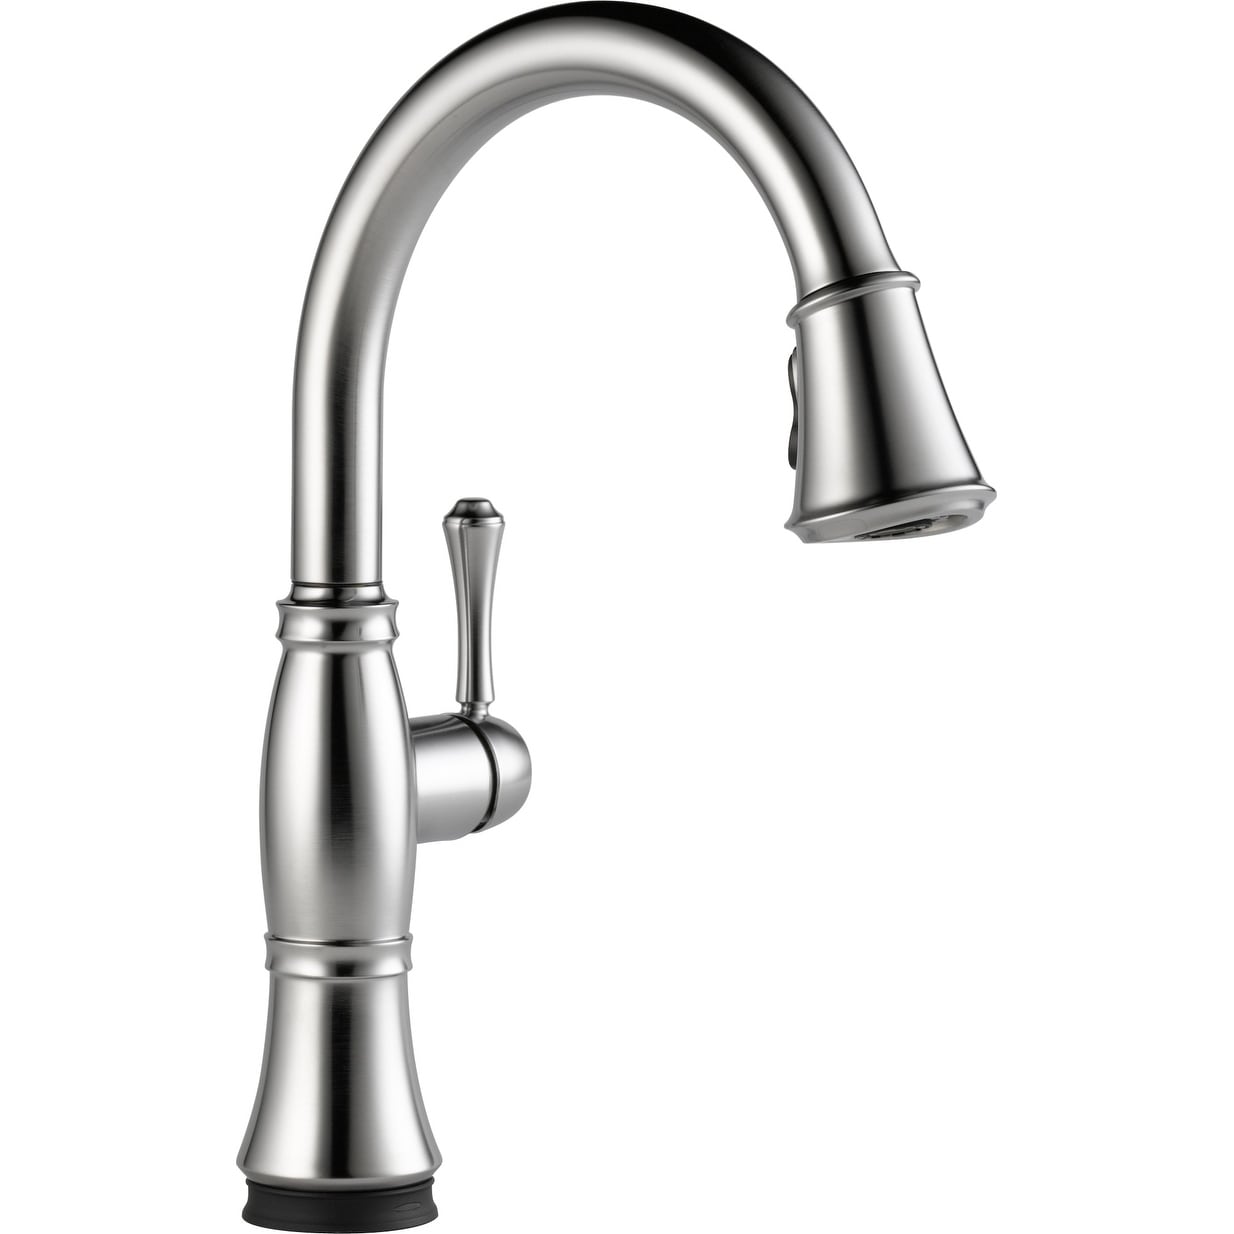 Delta 9197t Dst Cassidy Pull Down Kitchen Faucet With On Off Touch Overstock 17032027 Venetian Bronze